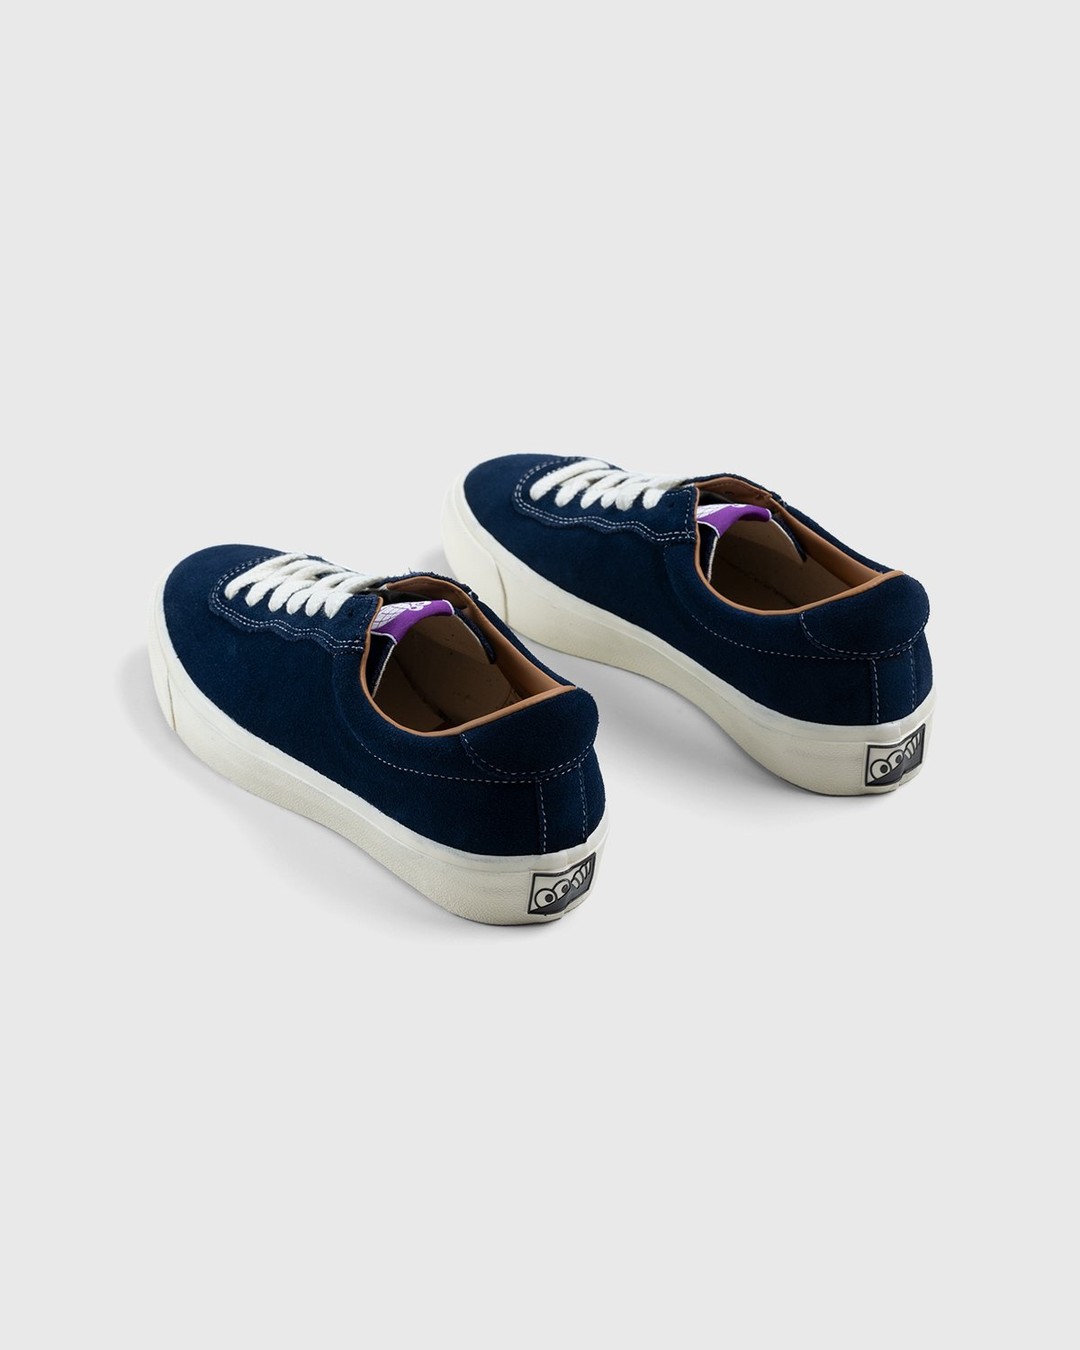 Last Resort AB – VM001 Lo Suede Old Blue/White - Sneakers - Blue - Image 4